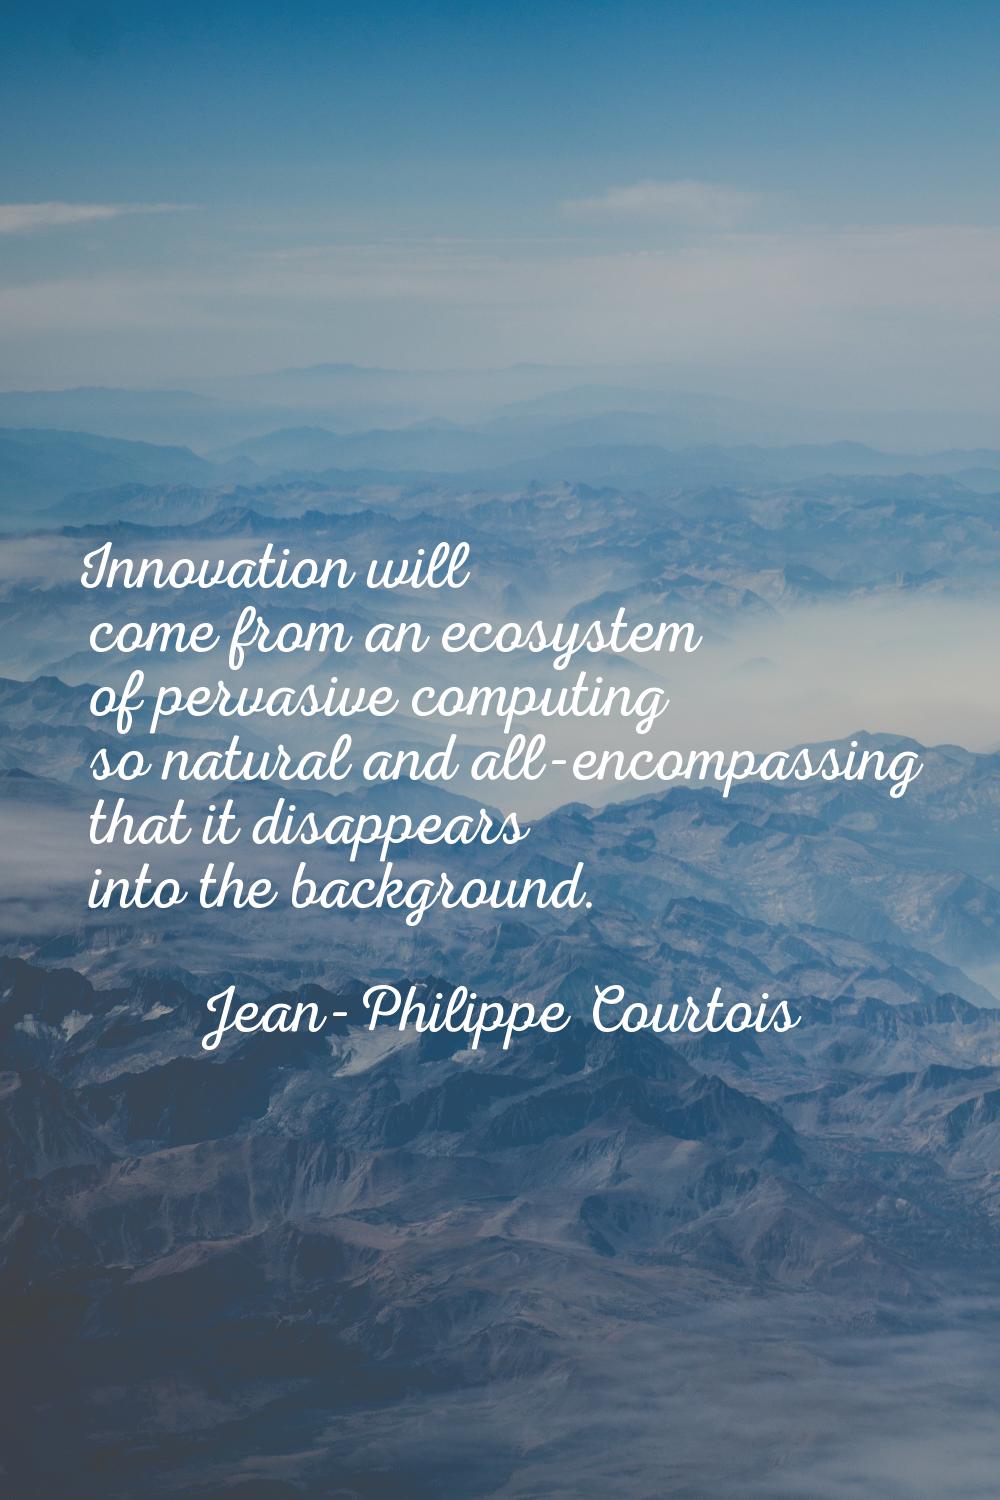 Innovation will come from an ecosystem of pervasive computing so natural and all-encompassing that 